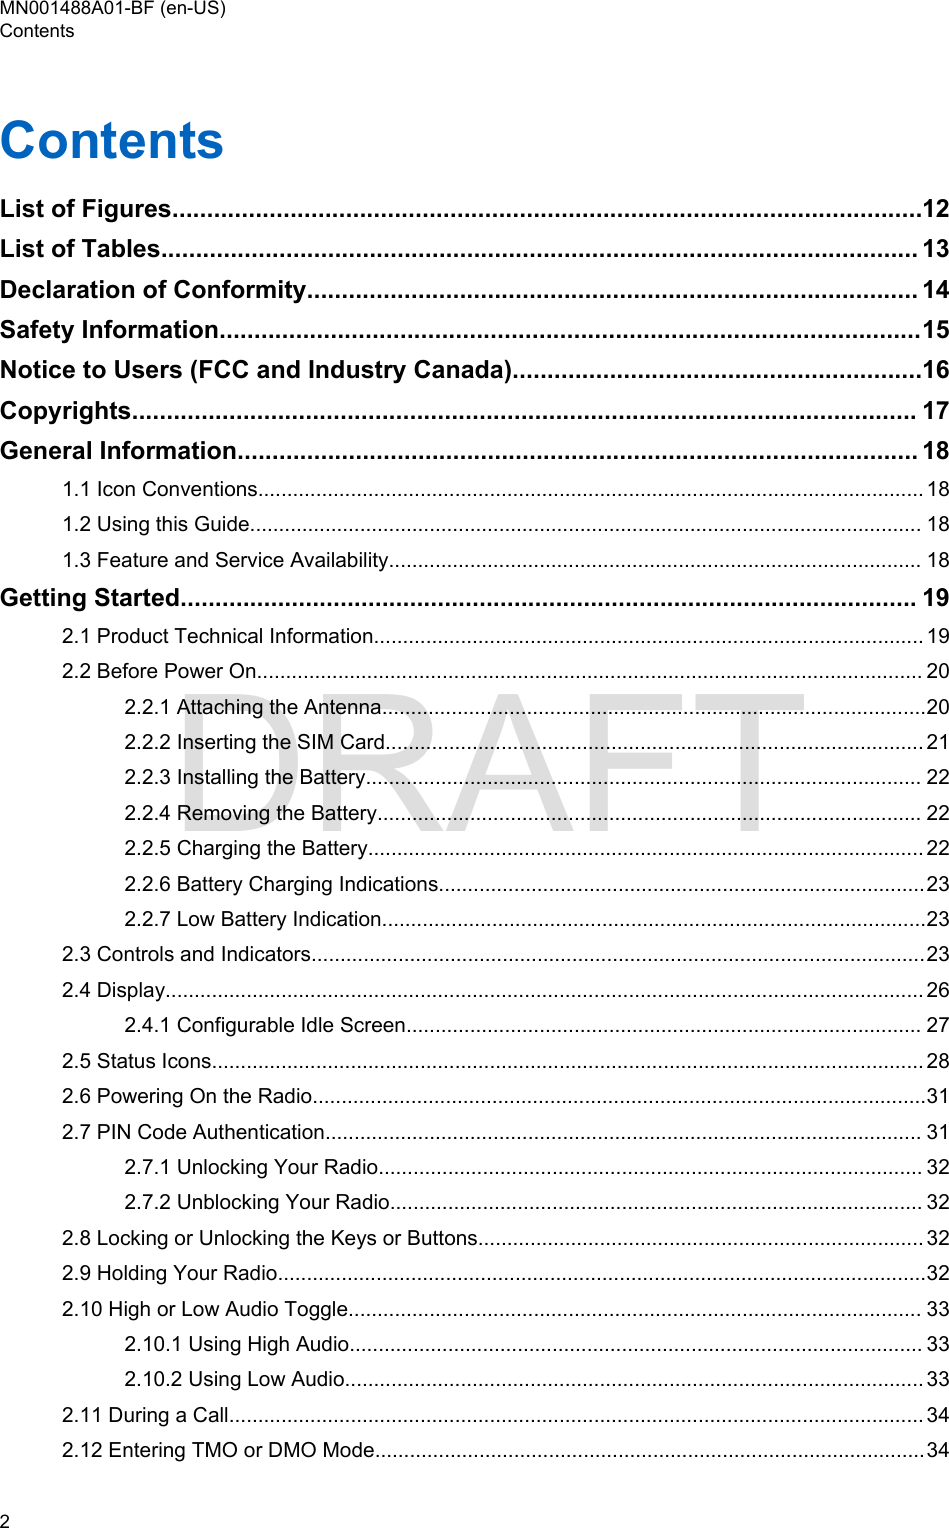 ContentsList of Figures............................................................................................................12List of Tables............................................................................................................. 13Declaration of Conformity........................................................................................ 14Safety Information.....................................................................................................15Notice to Users (FCC and Industry Canada)...........................................................16Copyrights................................................................................................................. 17General Information.................................................................................................. 181.1 Icon Conventions................................................................................................................... 181.2 Using this Guide.................................................................................................................... 181.3 Feature and Service Availability............................................................................................ 18Getting Started.......................................................................................................... 192.1 Product Technical Information............................................................................................... 192.2 Before Power On................................................................................................................... 202.2.1 Attaching the Antenna..............................................................................................202.2.2 Inserting the SIM Card............................................................................................. 212.2.3 Installing the Battery................................................................................................ 222.2.4 Removing the Battery.............................................................................................. 222.2.5 Charging the Battery................................................................................................ 222.2.6 Battery Charging Indications....................................................................................232.2.7 Low Battery Indication..............................................................................................232.3 Controls and Indicators..........................................................................................................232.4 Display................................................................................................................................... 262.4.1 Configurable Idle Screen......................................................................................... 272.5 Status Icons........................................................................................................................... 282.6 Powering On the Radio..........................................................................................................312.7 PIN Code Authentication....................................................................................................... 312.7.1 Unlocking Your Radio.............................................................................................. 322.7.2 Unblocking Your Radio............................................................................................ 322.8 Locking or Unlocking the Keys or Buttons............................................................................. 322.9 Holding Your Radio................................................................................................................322.10 High or Low Audio Toggle................................................................................................... 332.10.1 Using High Audio................................................................................................... 332.10.2 Using Low Audio.................................................................................................... 332.11 During a Call........................................................................................................................ 342.12 Entering TMO or DMO Mode...............................................................................................34MN001488A01-BF (en-US)Contents2  DRAFT